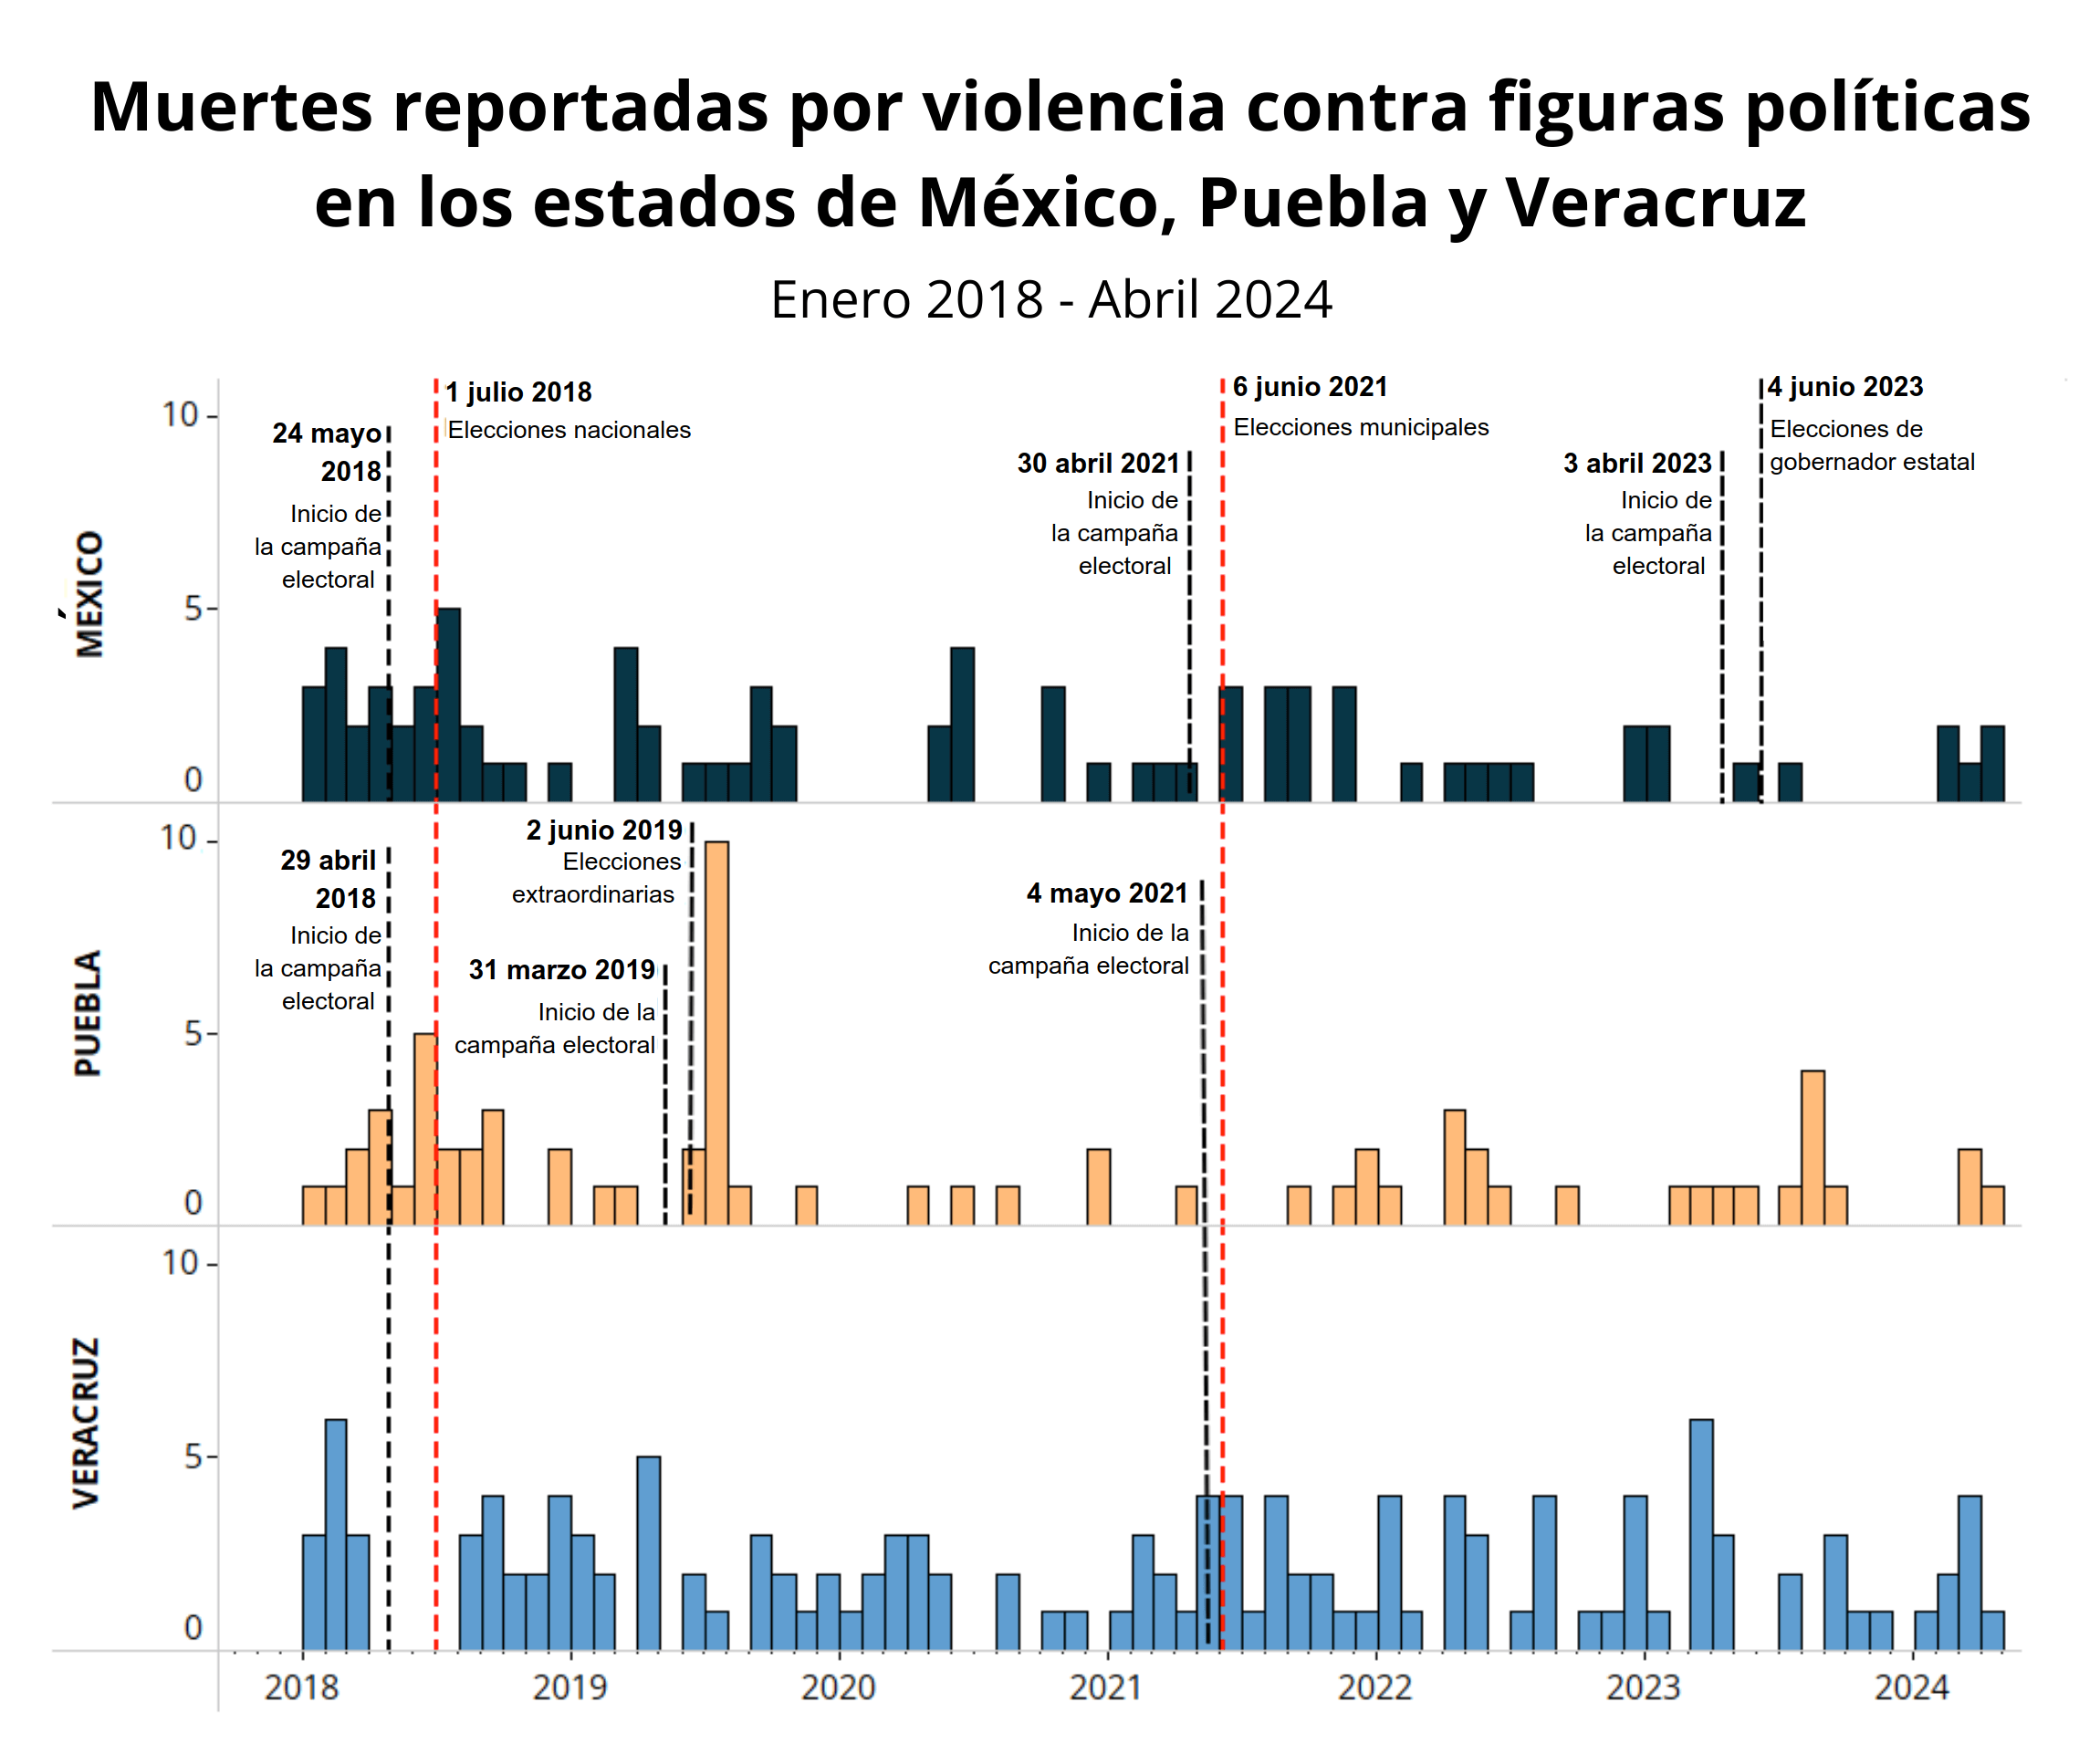 Chart - Election watch - SPANISH Reported fatalities from violence targeting Political figures in Mexico, Puebla and Veracruz States - January 2018 - April 2024